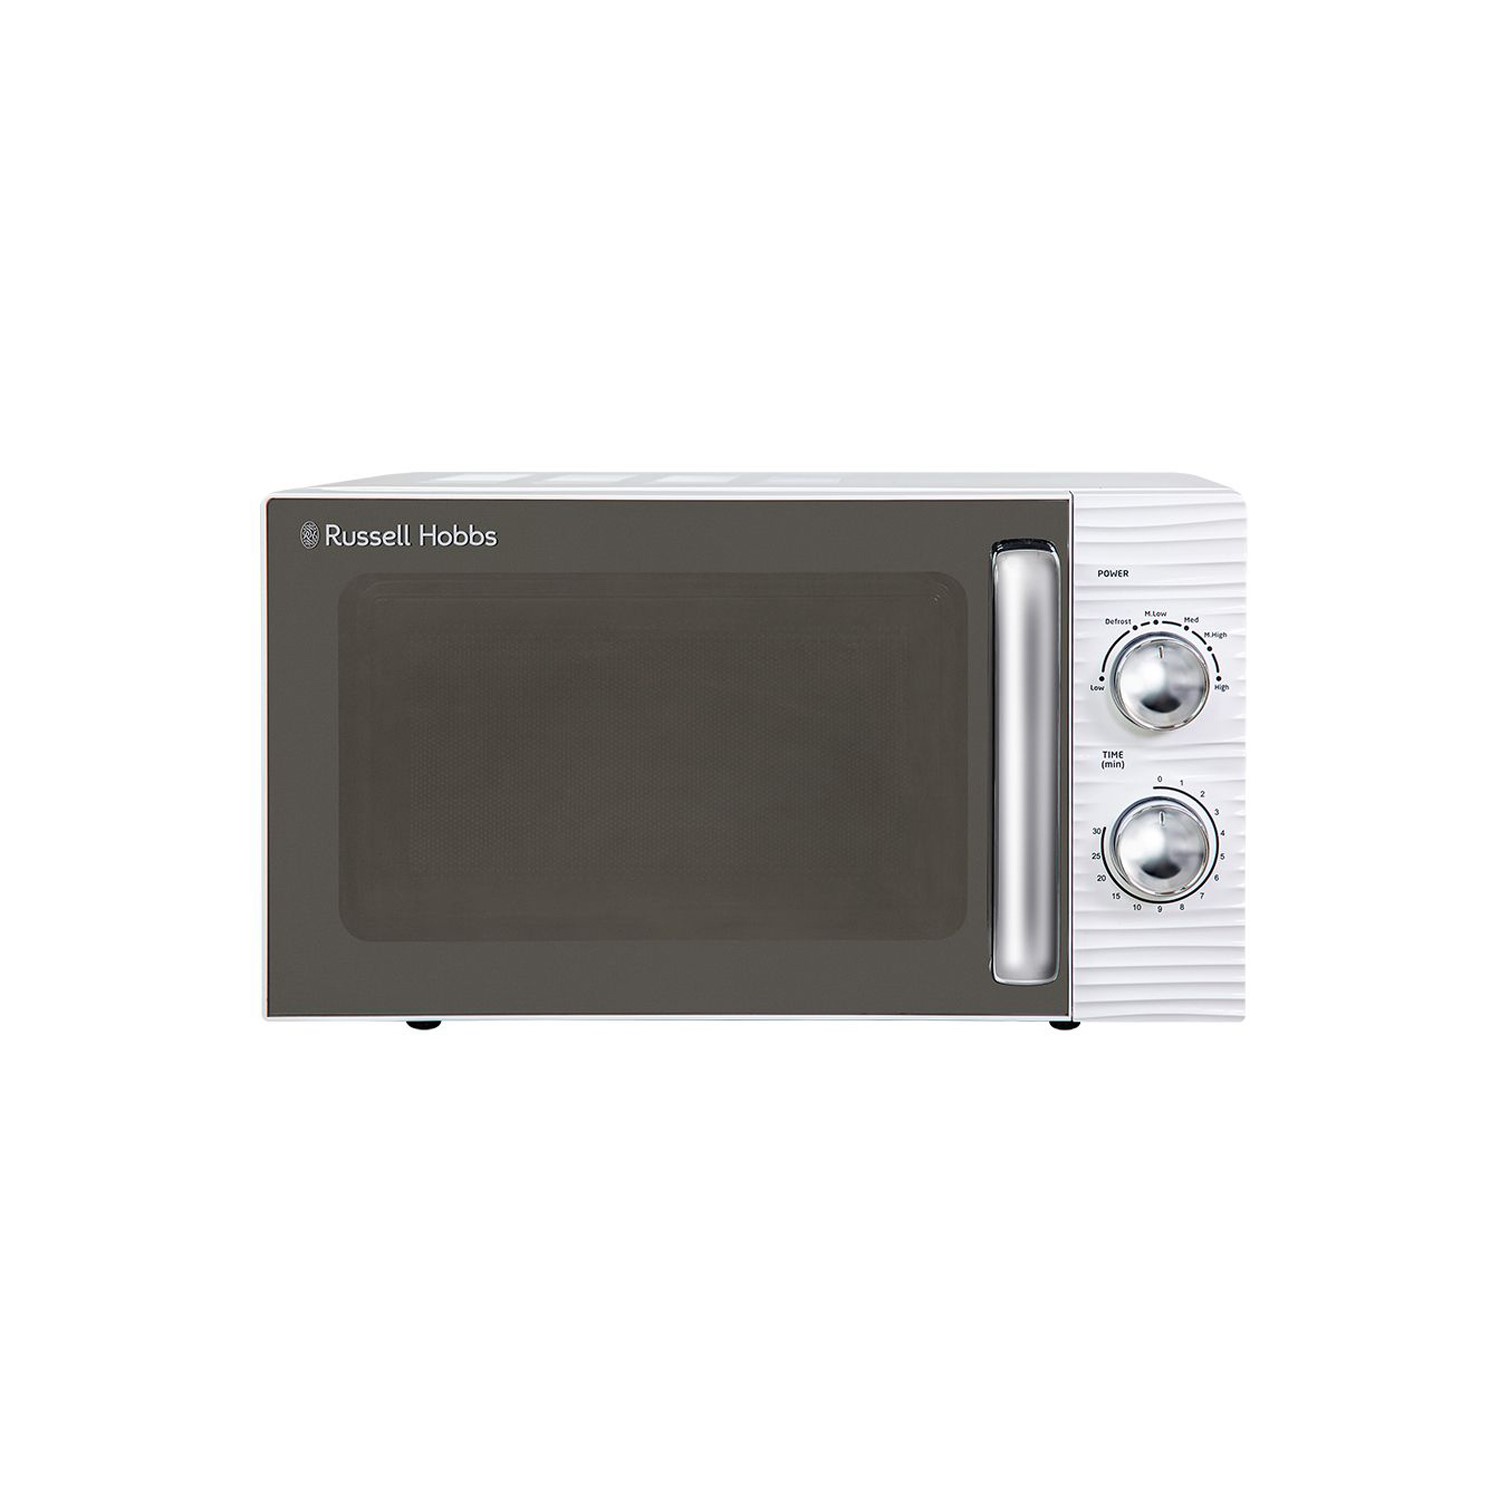 Russell Hobbs RHM1731 Inspire 17L Microwave Oven - White